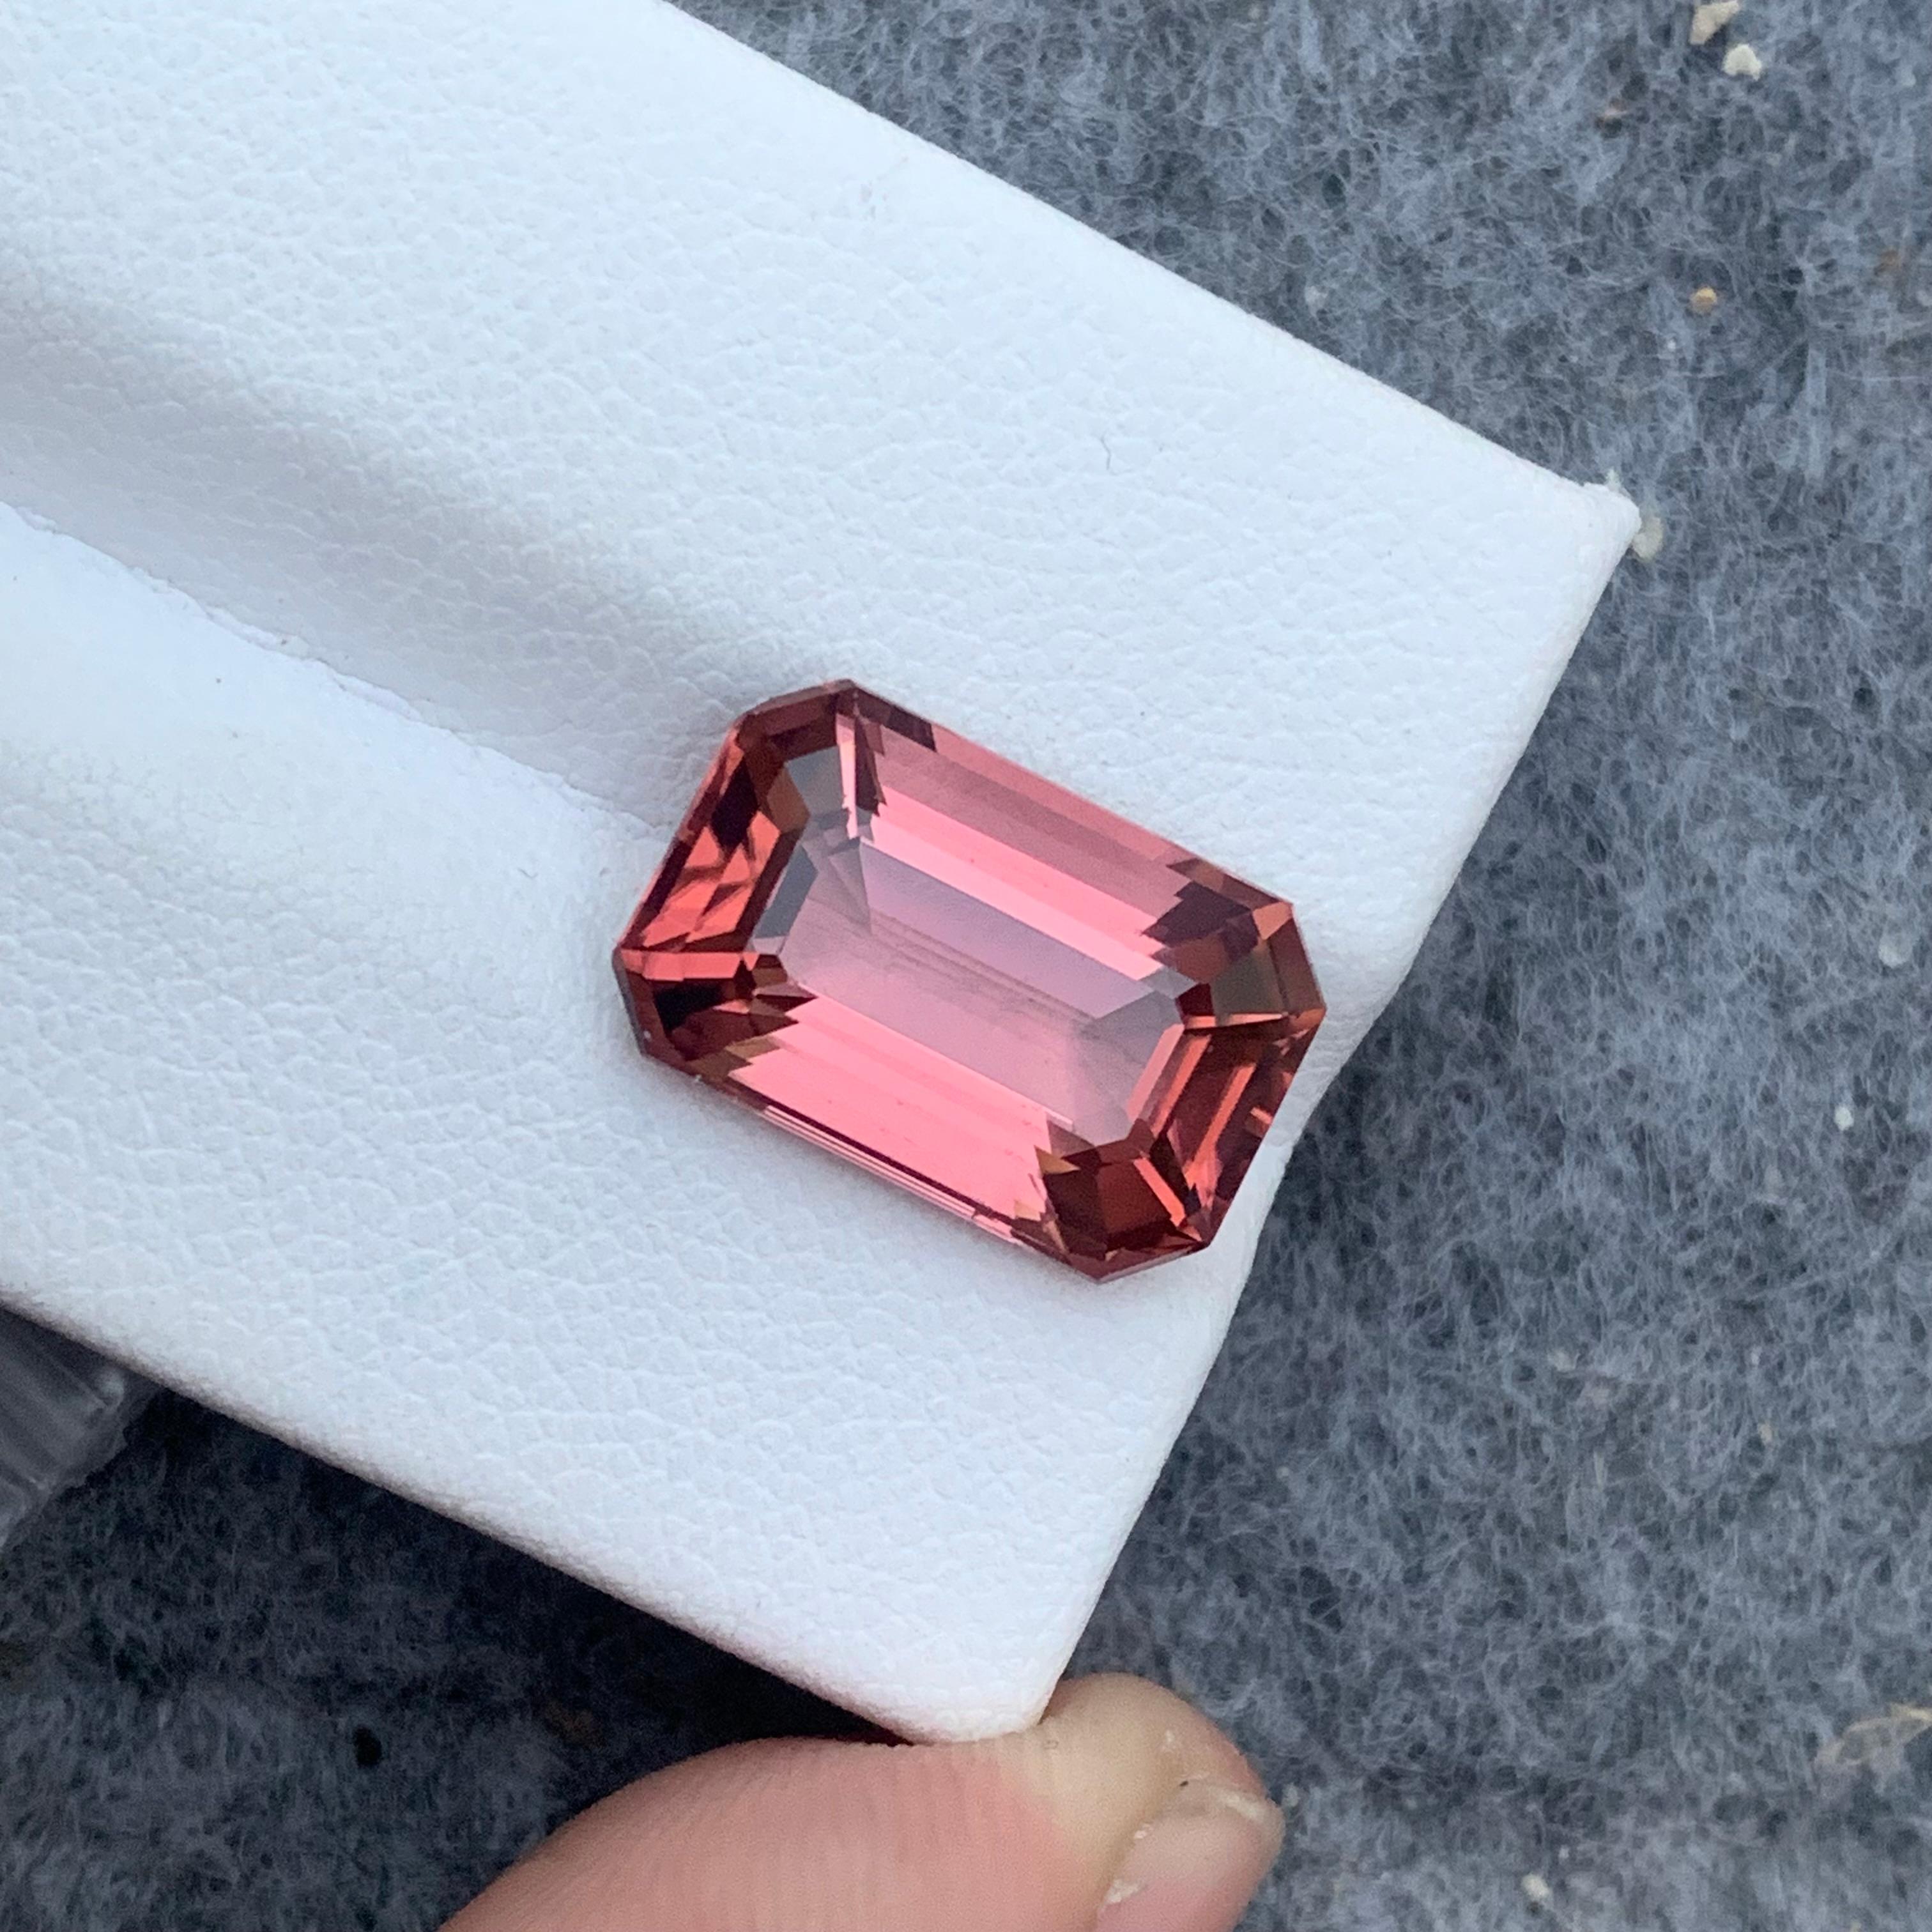 9.0 Carat AAA Quality Loose Soft Pink Tourmaline Emerald Cut From Afghanistan 1